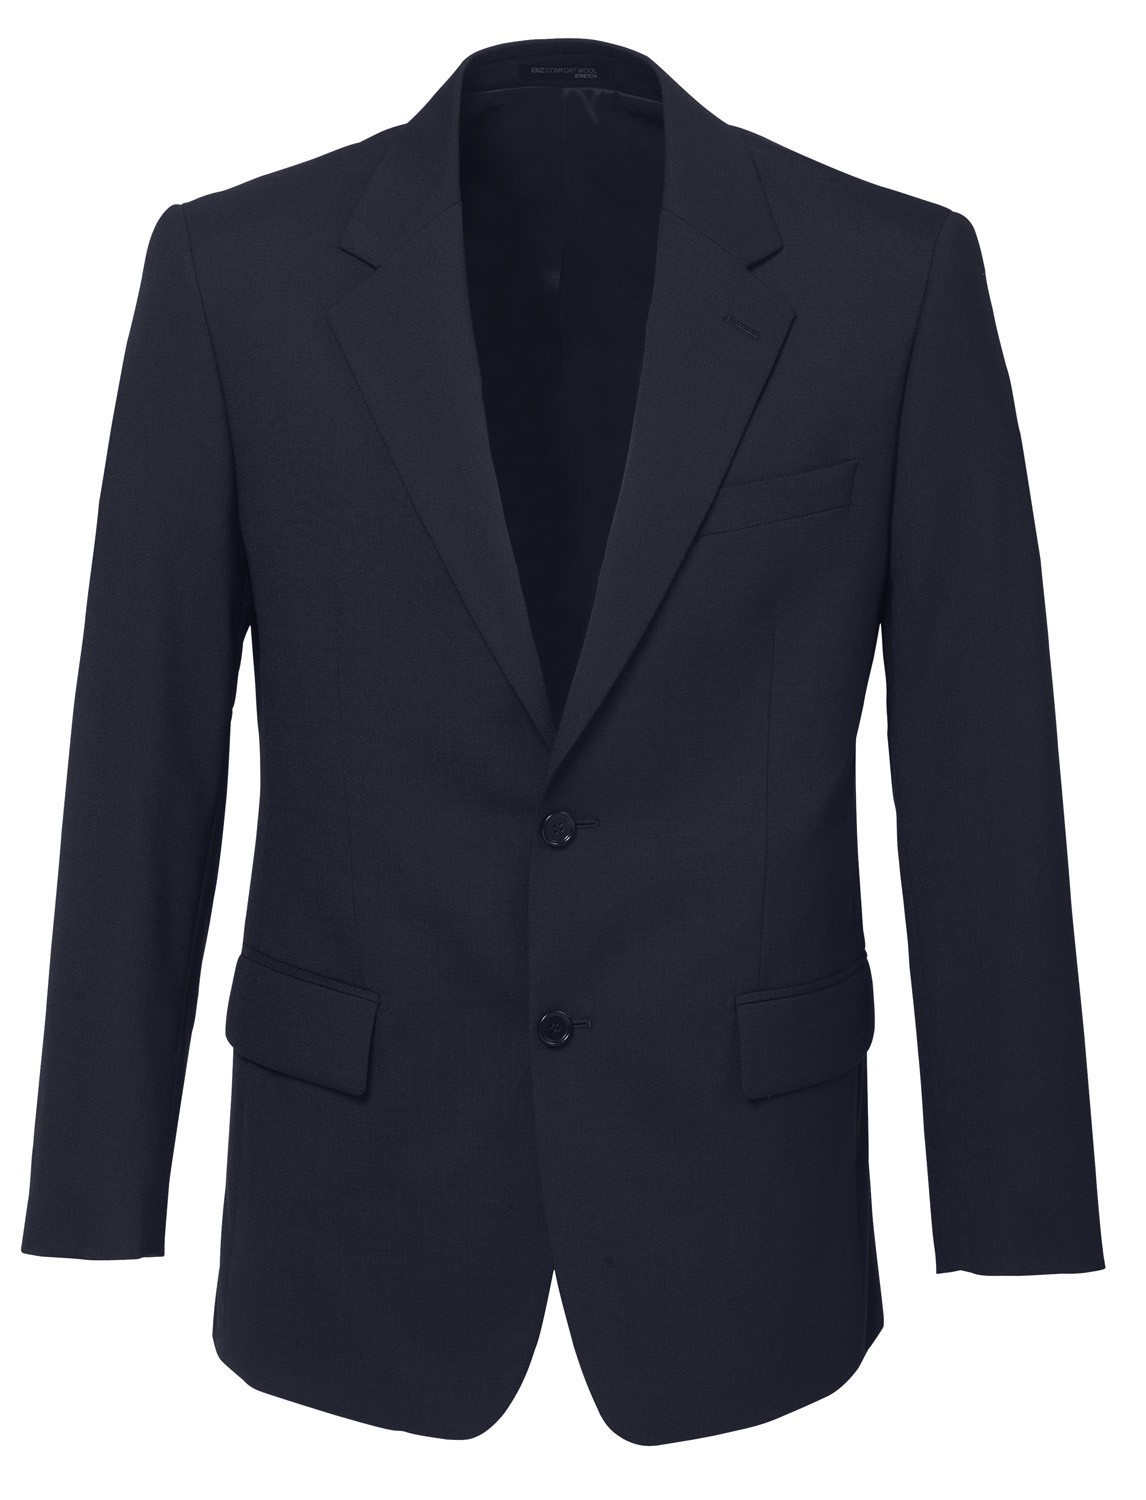 Buy Mens 2 Button Suit Jacket - Wool Stretch in NZ | The Uniform Centre